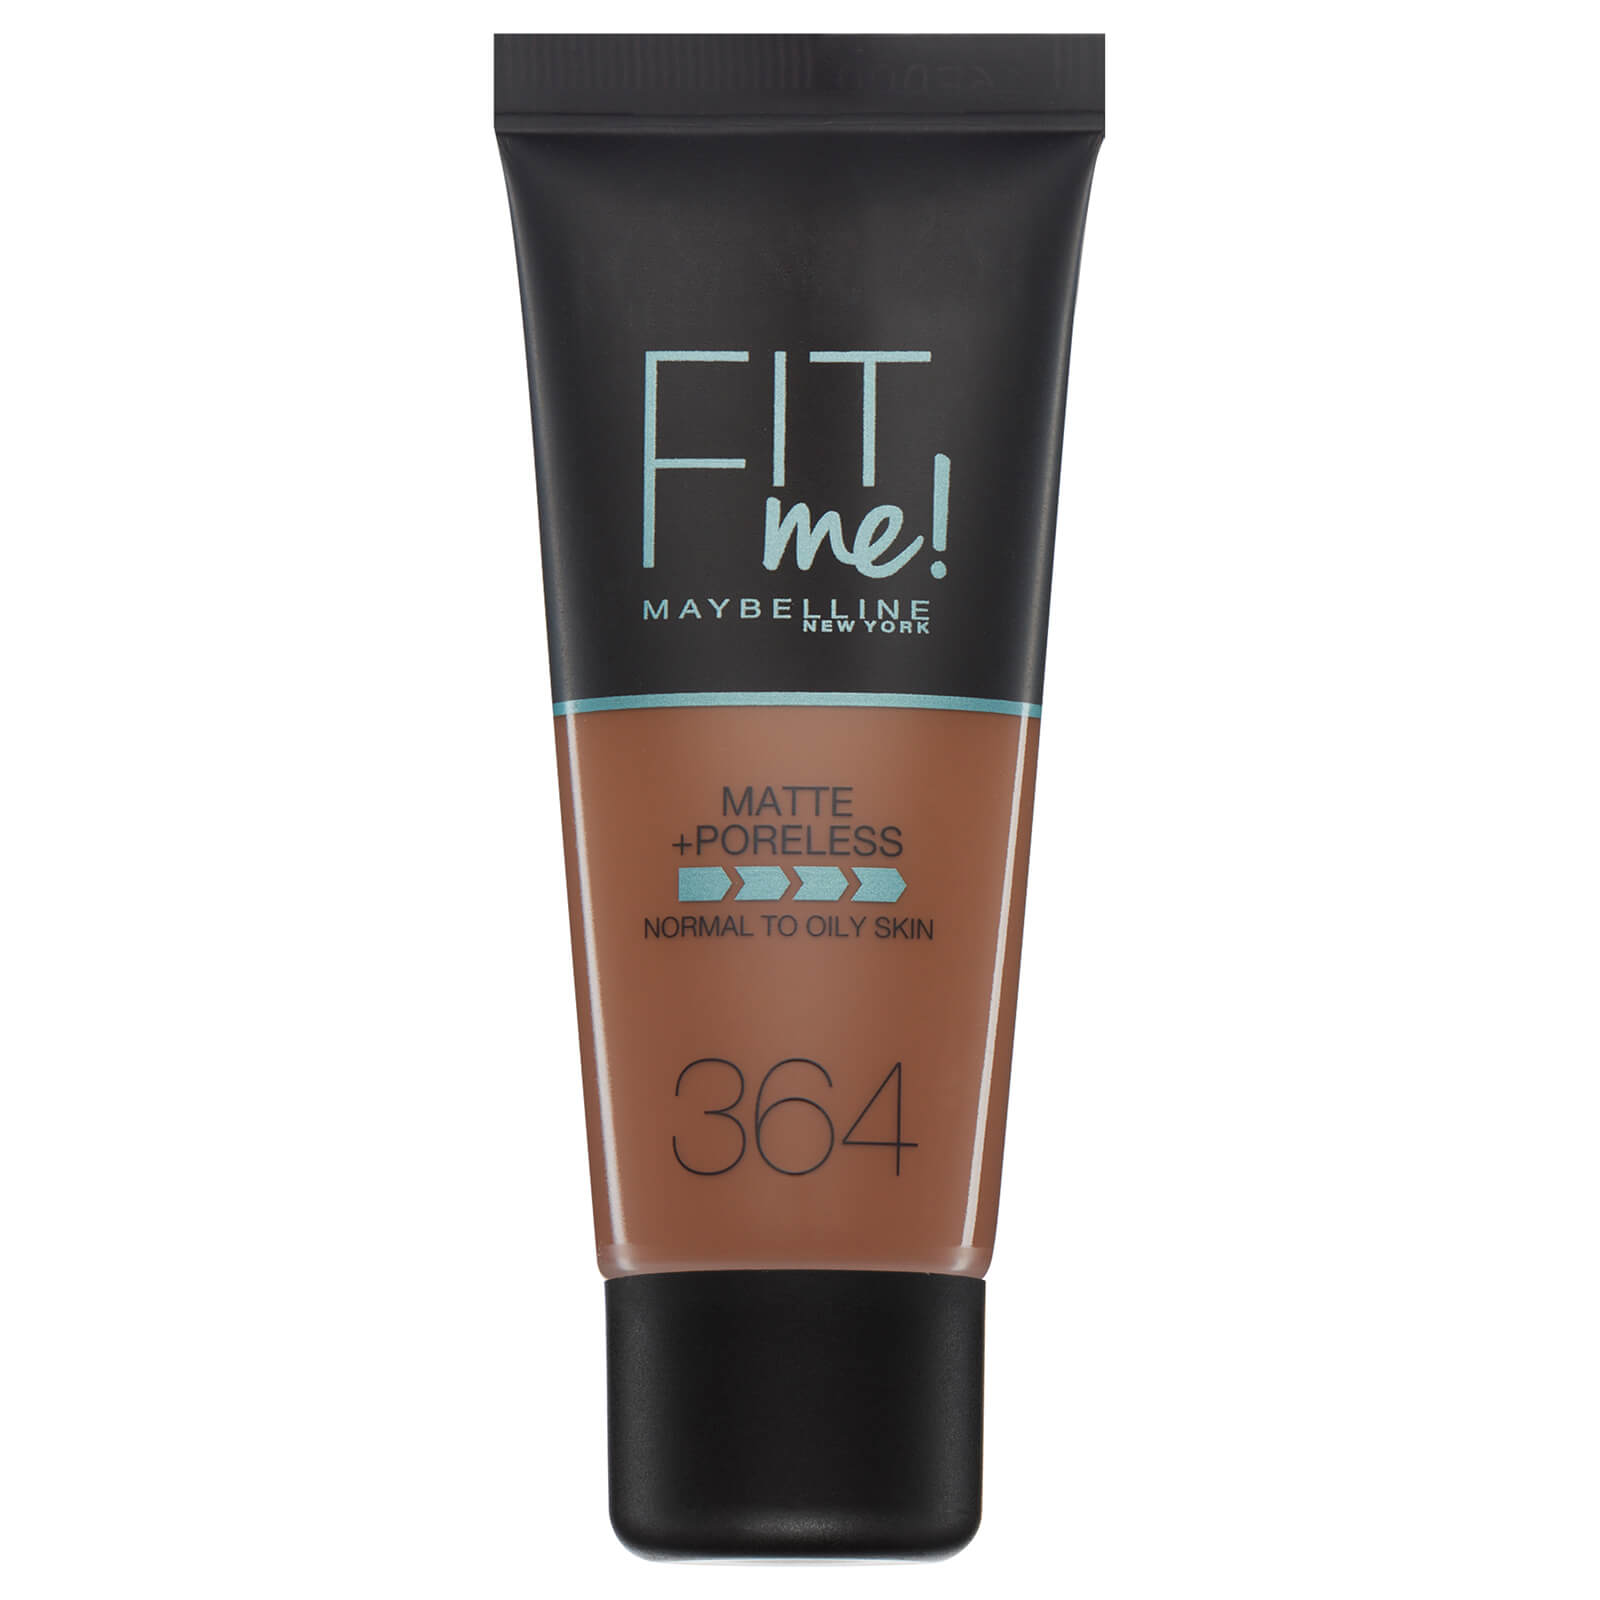 Maybelline Fit Me! Matte and Poreless Foundation 30ml (Various Shades) - 3 364 Deep Bronze